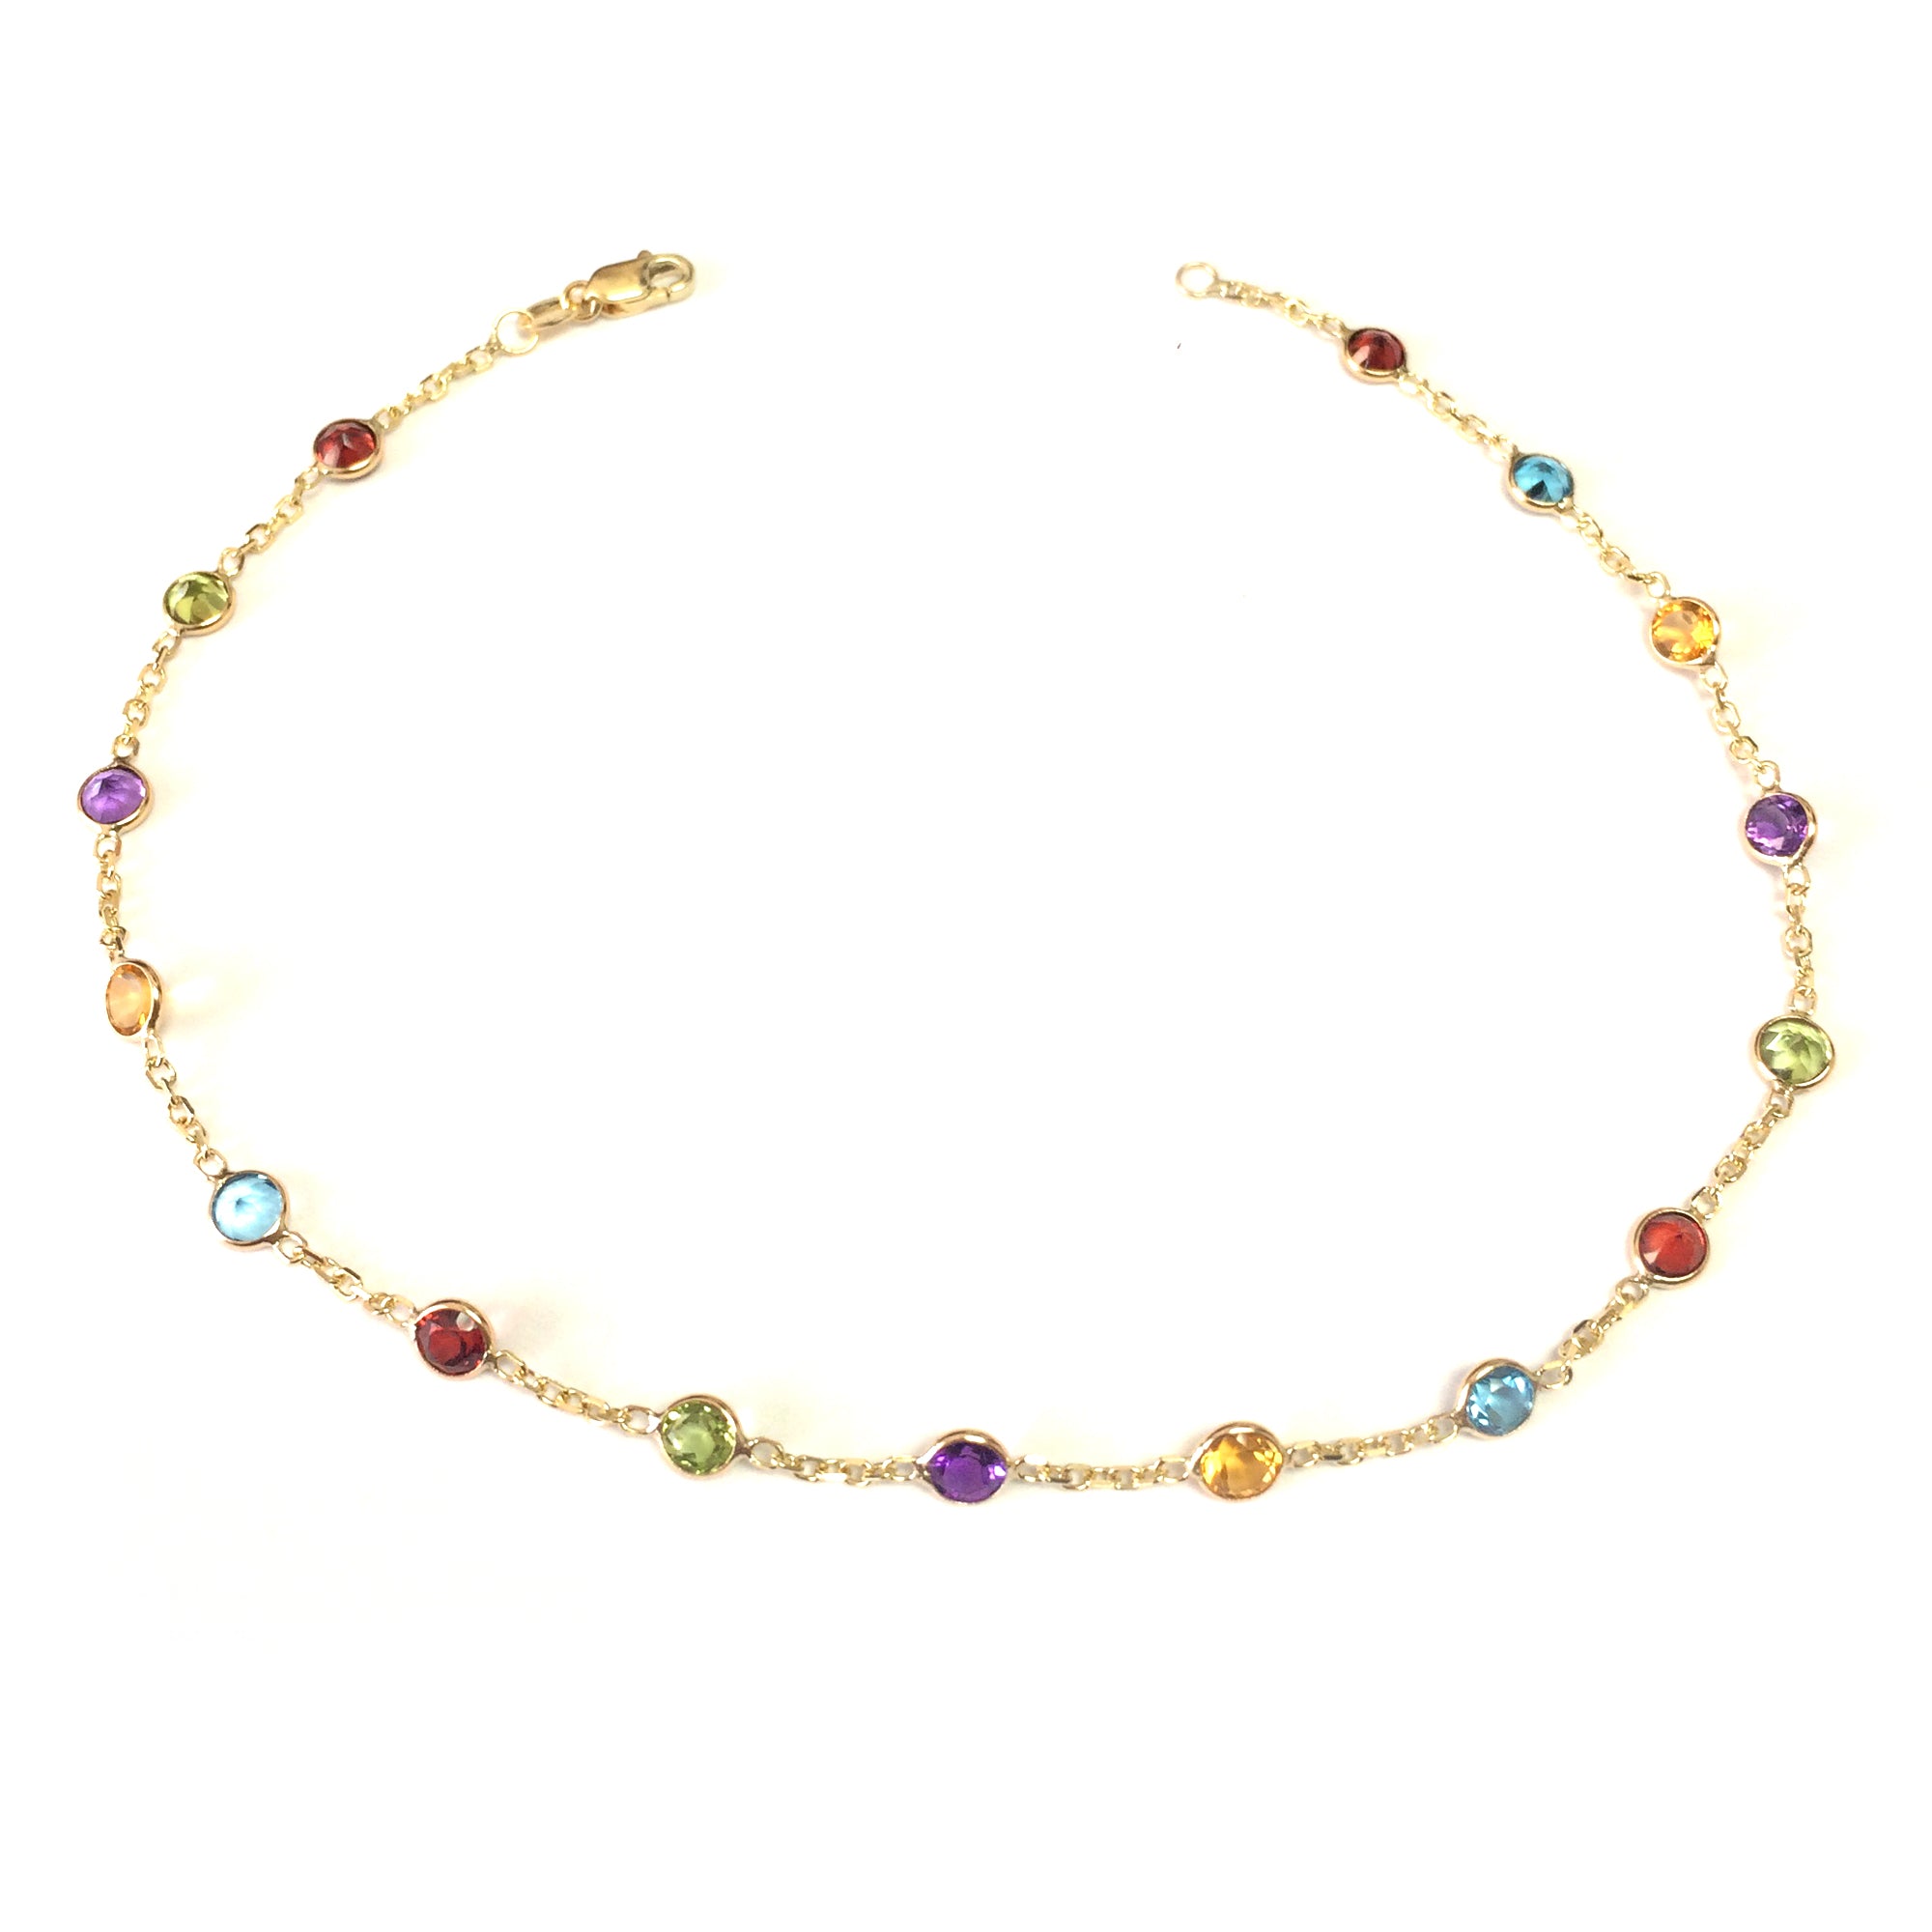 14k Yellow Gold Cable Chain Link Anklet And Alternate Round Faceted 5 Color Stones, 10" fine designer jewelry for men and women